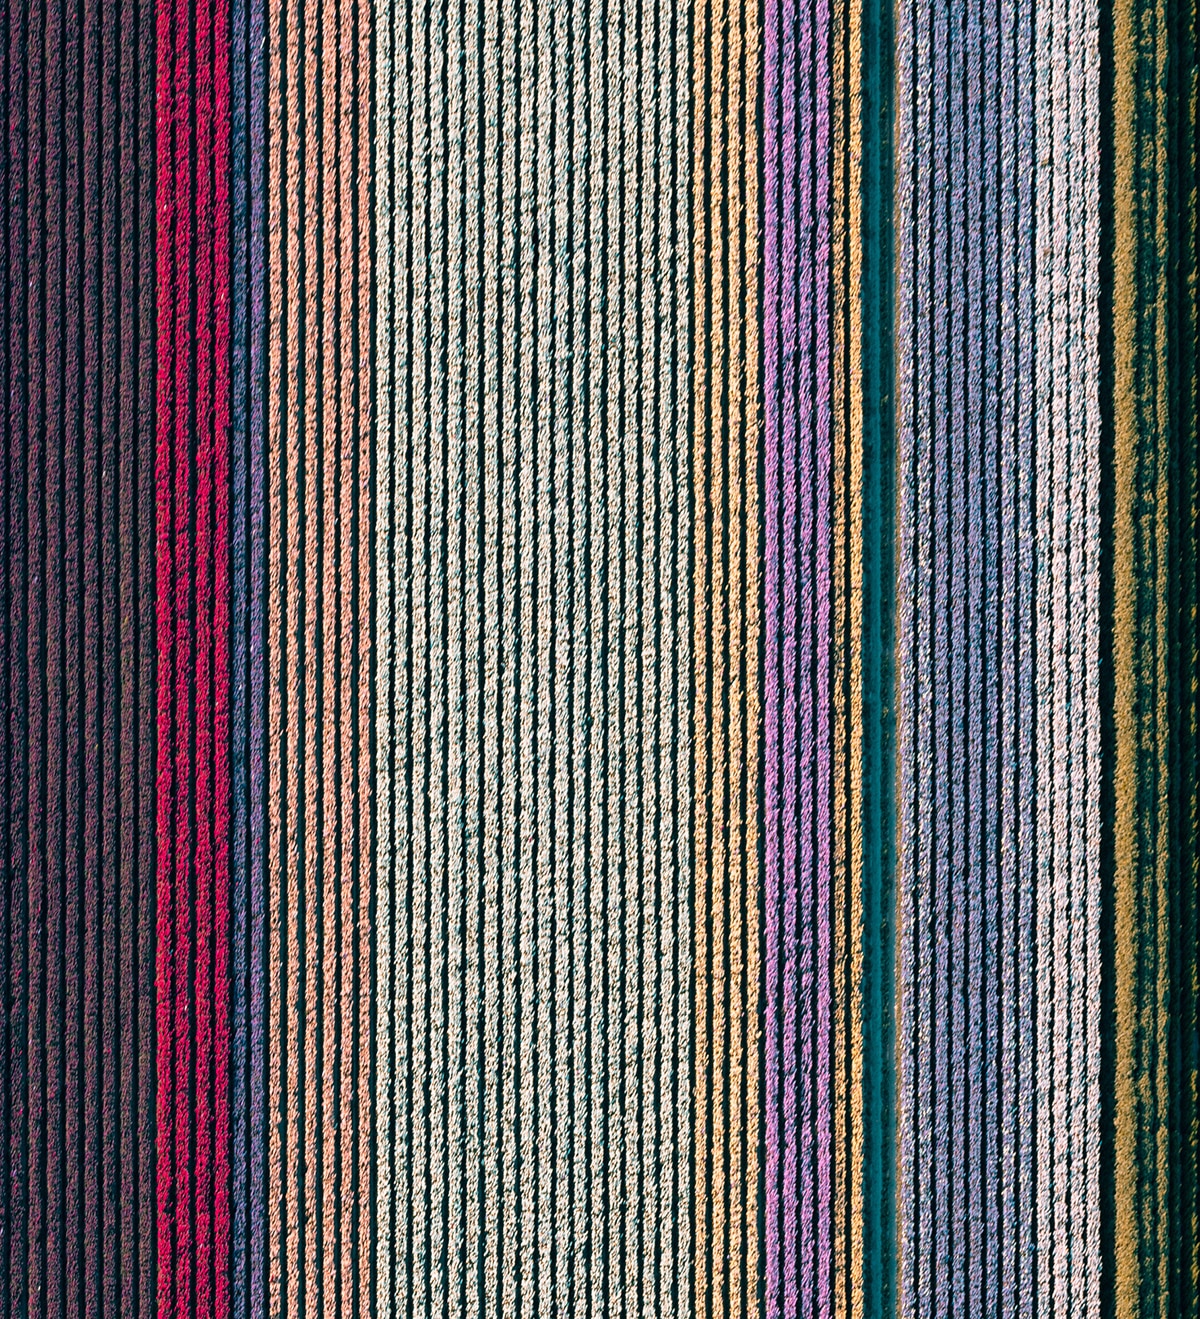 Colorful Photo of Flowers in a Field